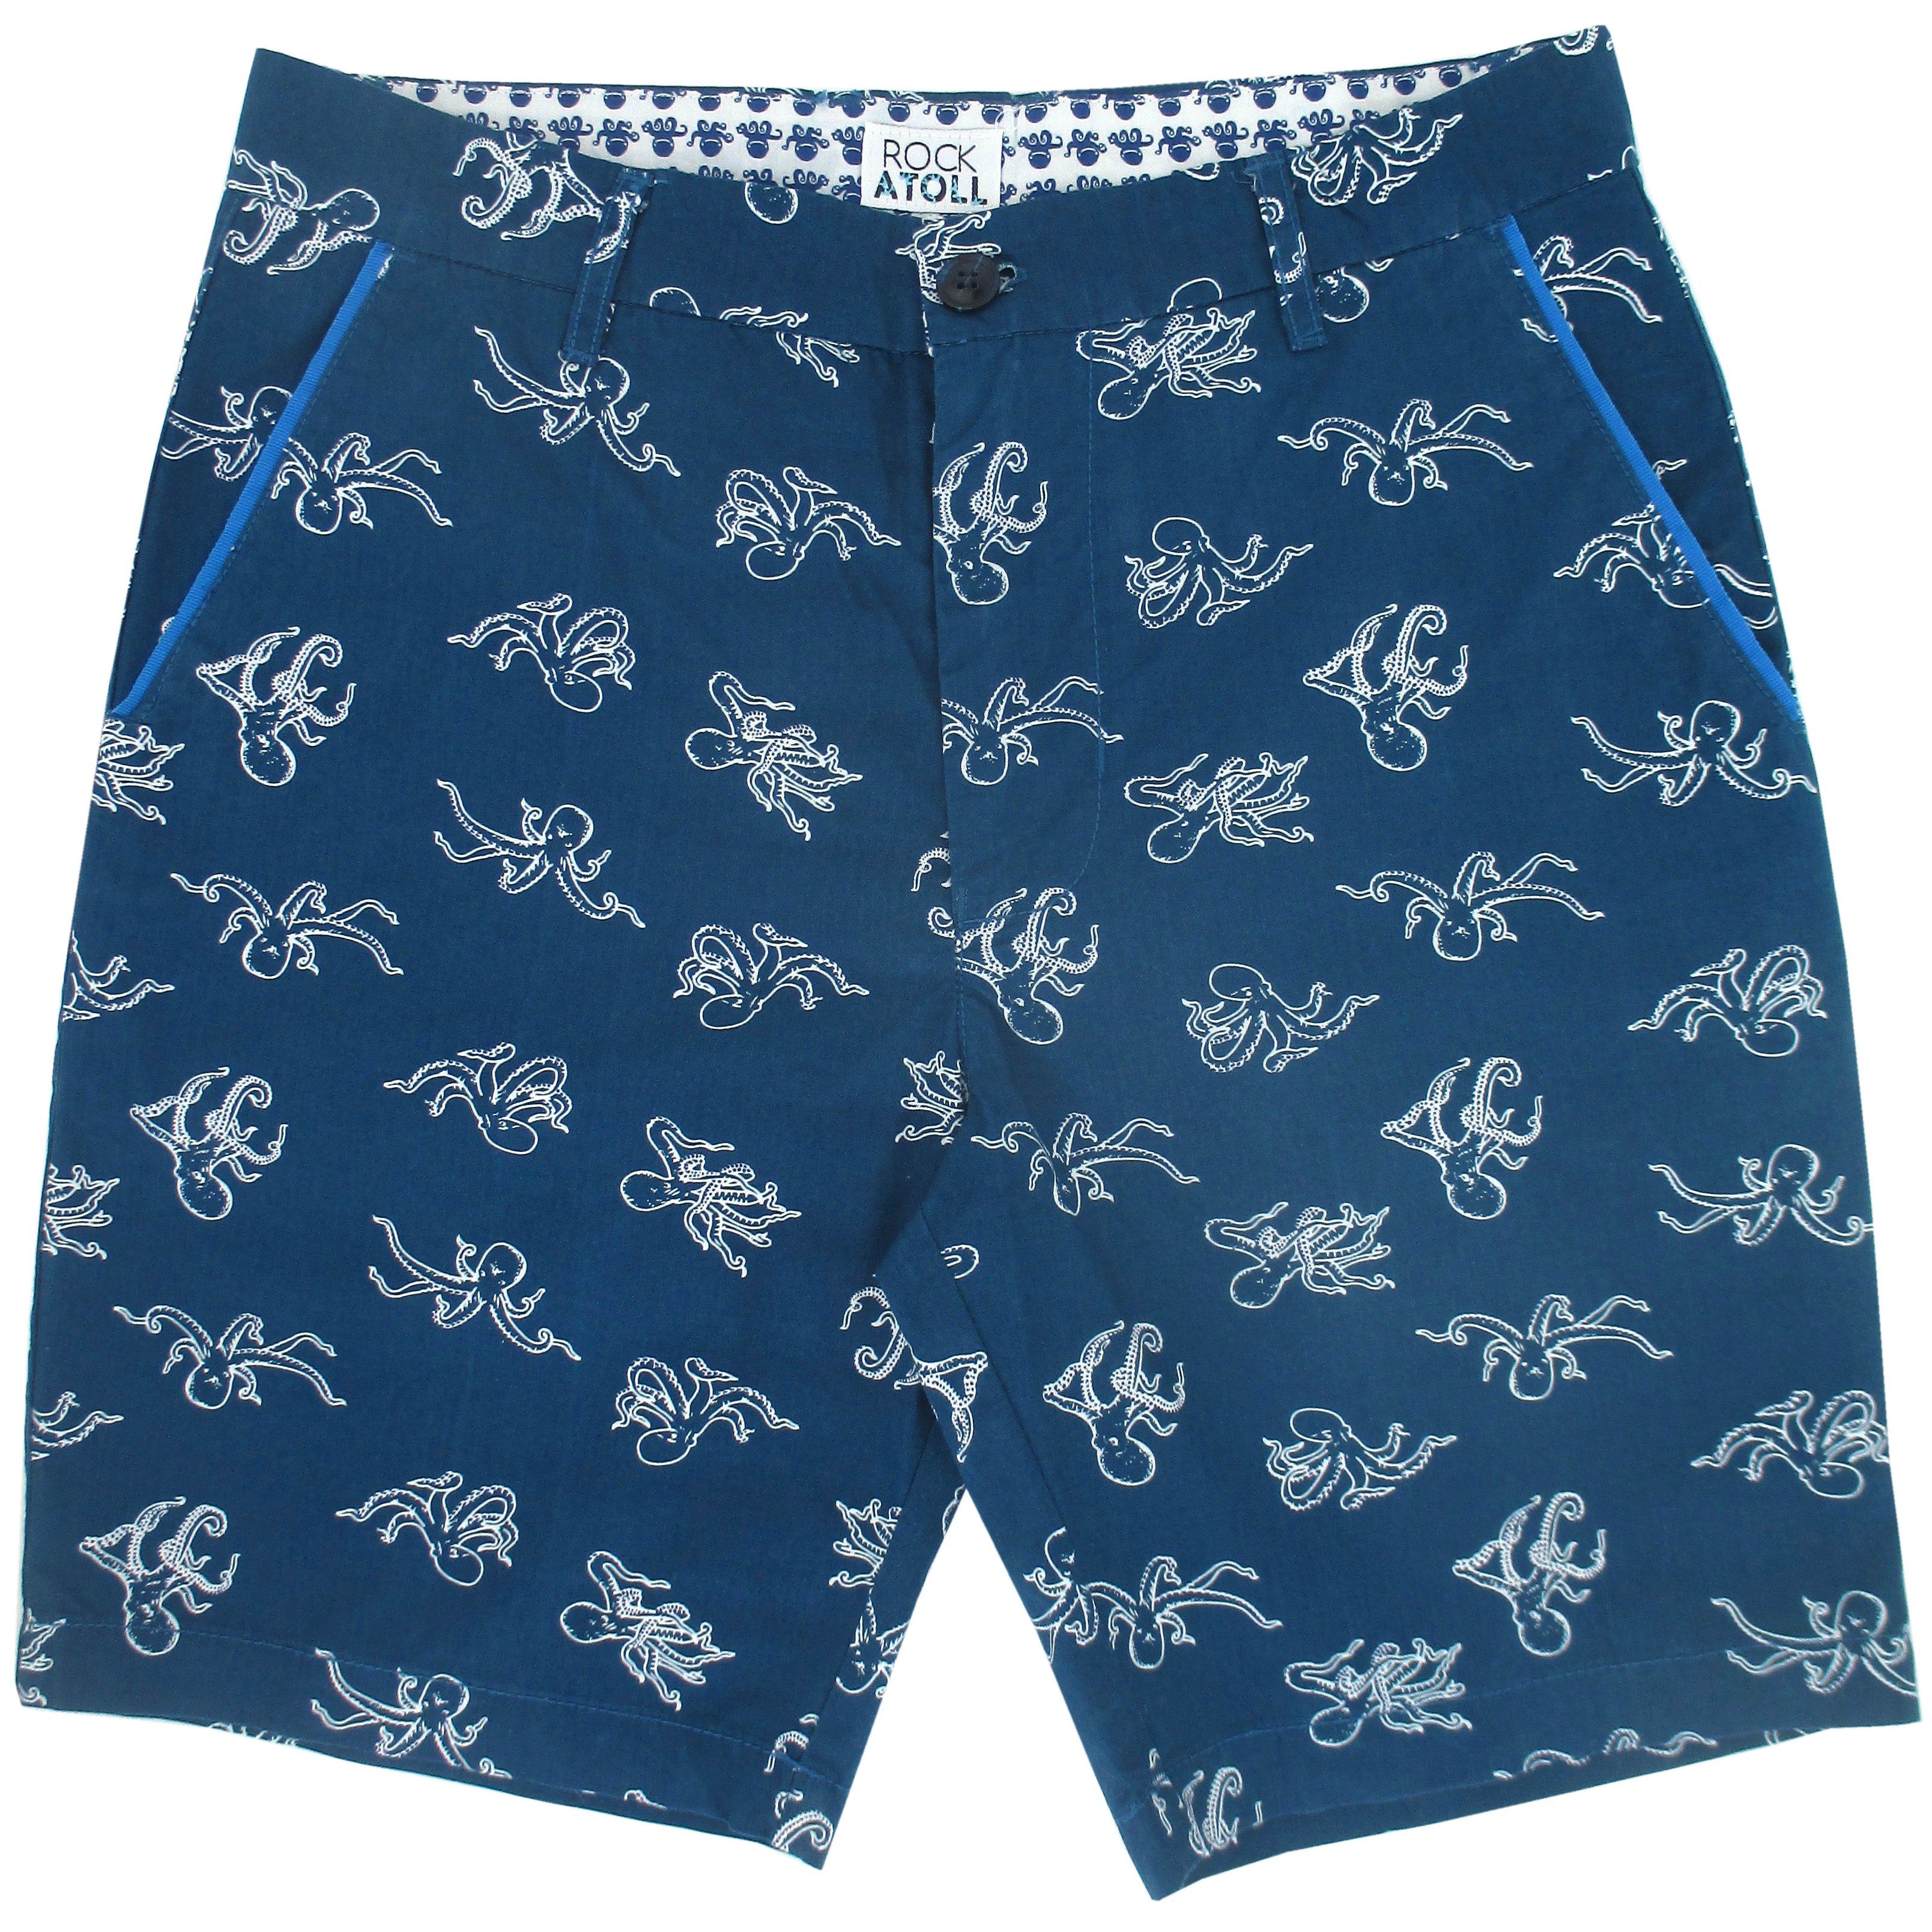 Rock Atoll Menswear Octopus All Over Print Bermuda Shorts in Blue